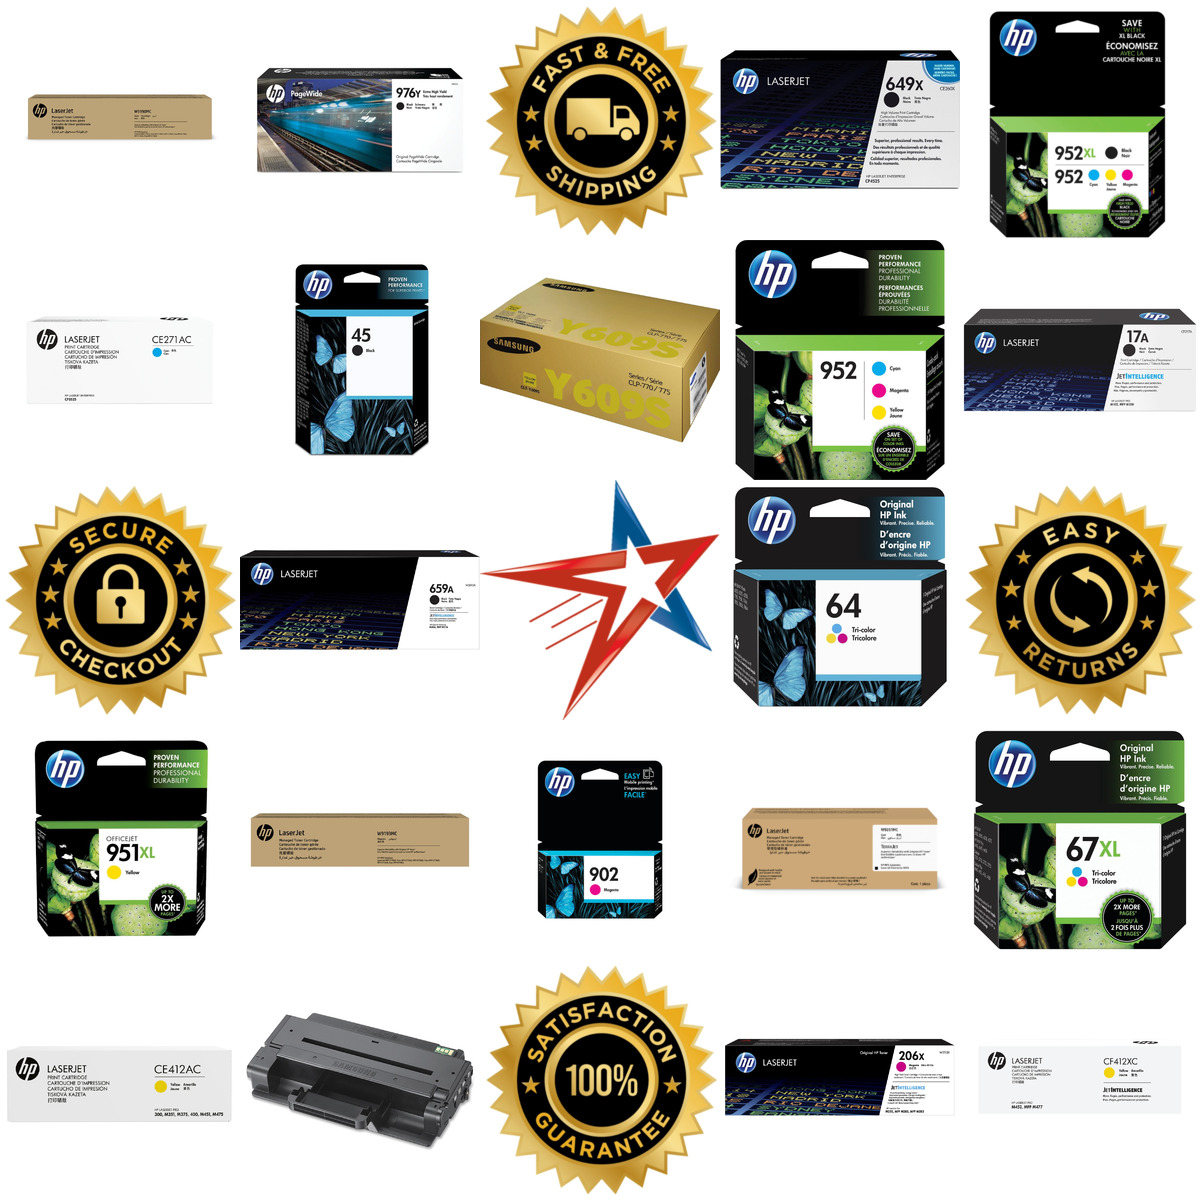 A selection of hp inc. products on GoVets